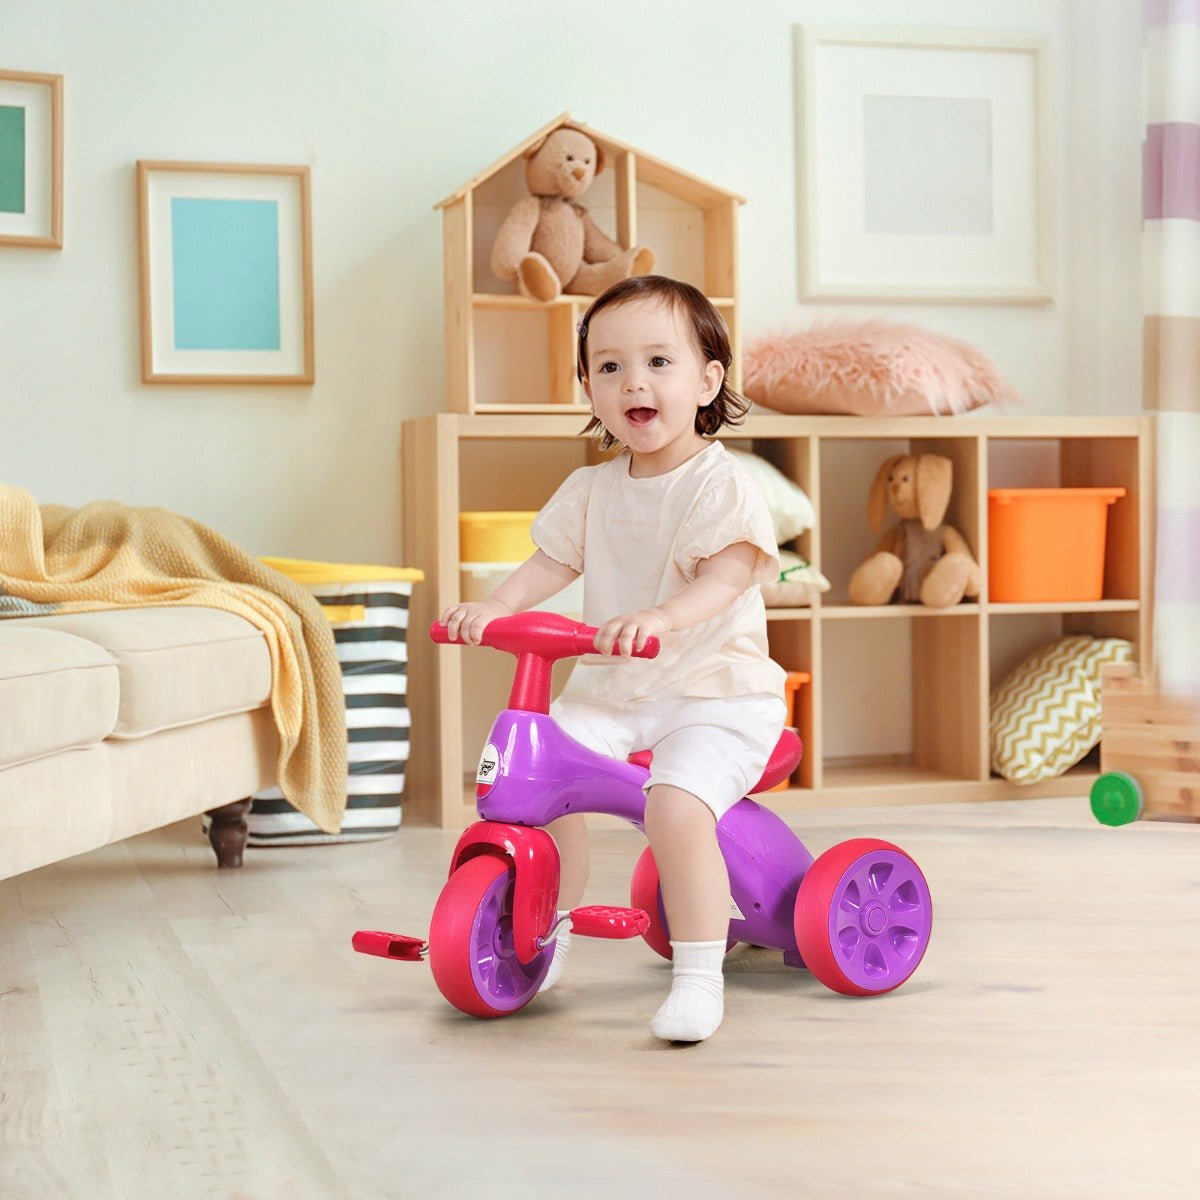 Toddler's Joy: Pink Tricycle with Foot Pedals for Playful Adventures